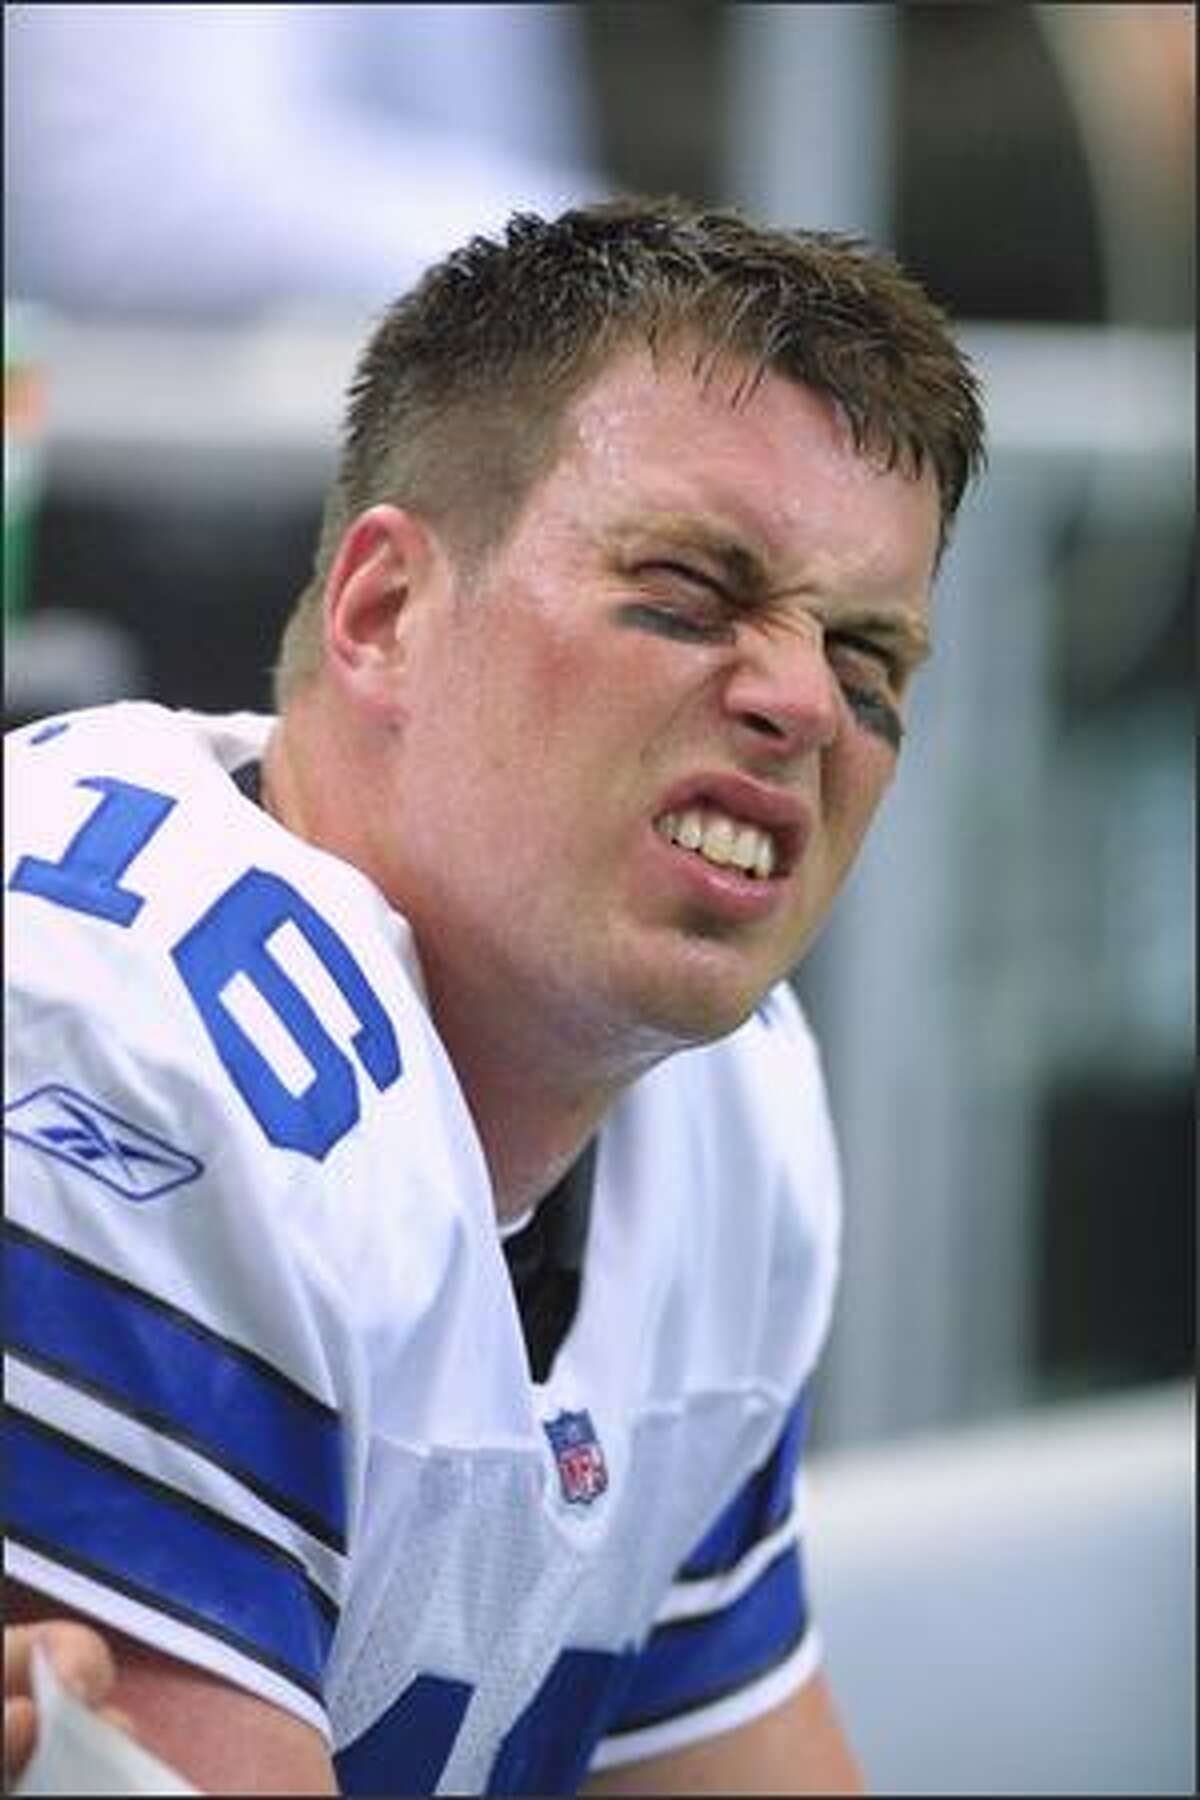 Quarterback Ryan Leaf of the Dallas Cowboys looks up at the scoreboard as his team loses to the Atlanta Falcons in this November 2001 file photo.